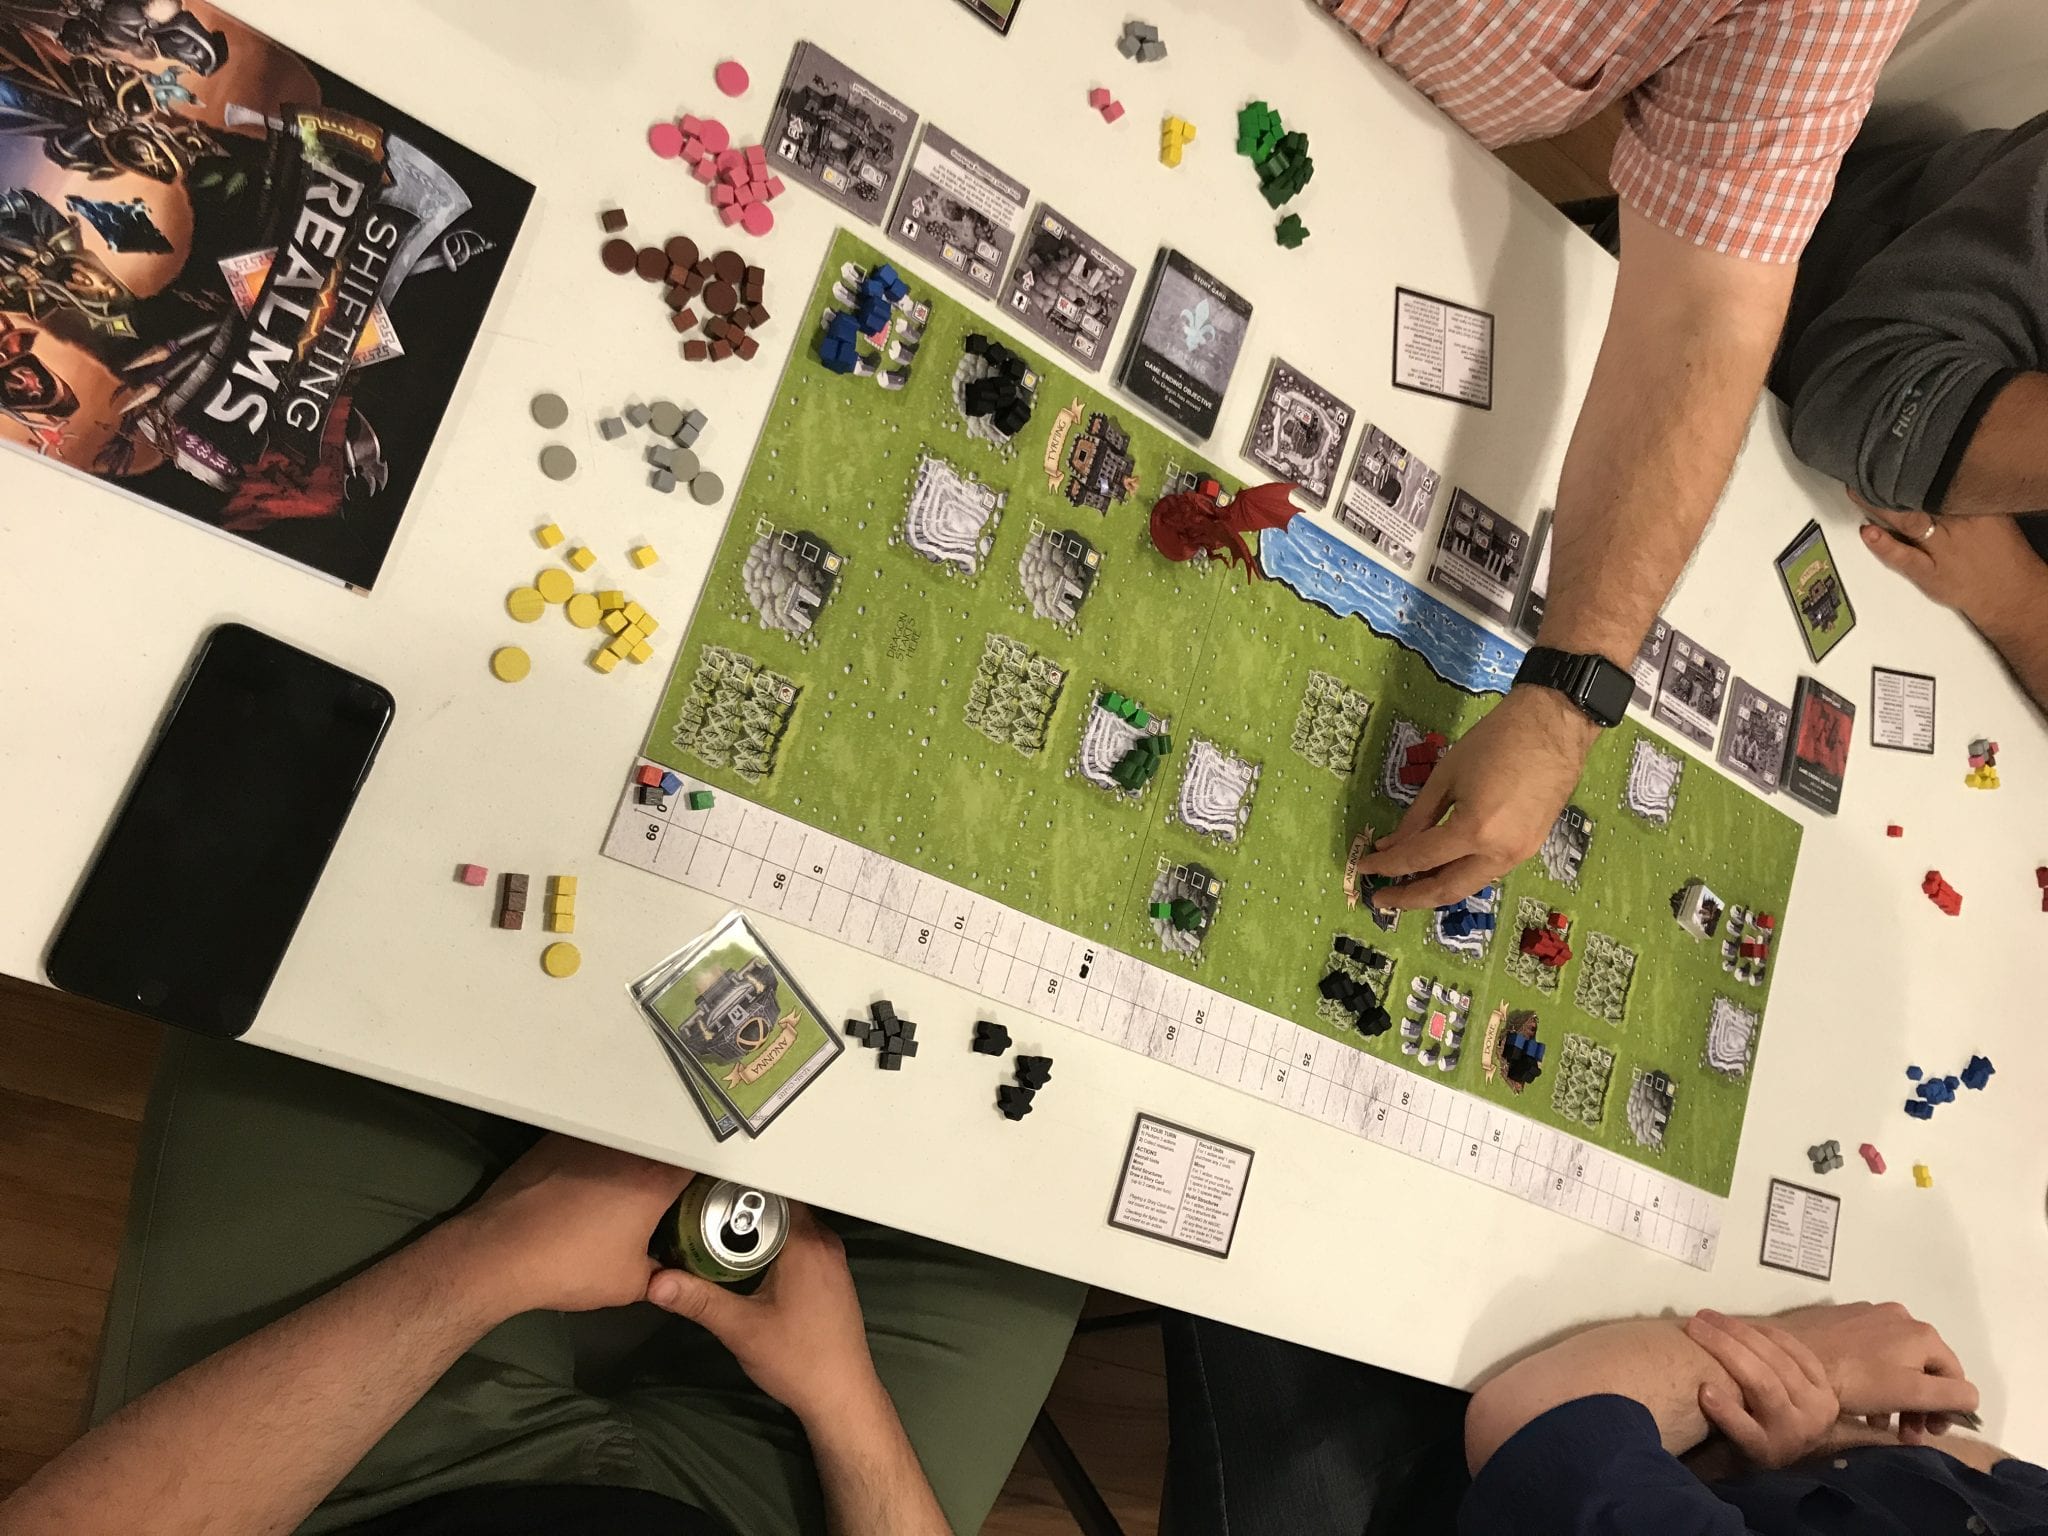 Playtesting a tabletop board game